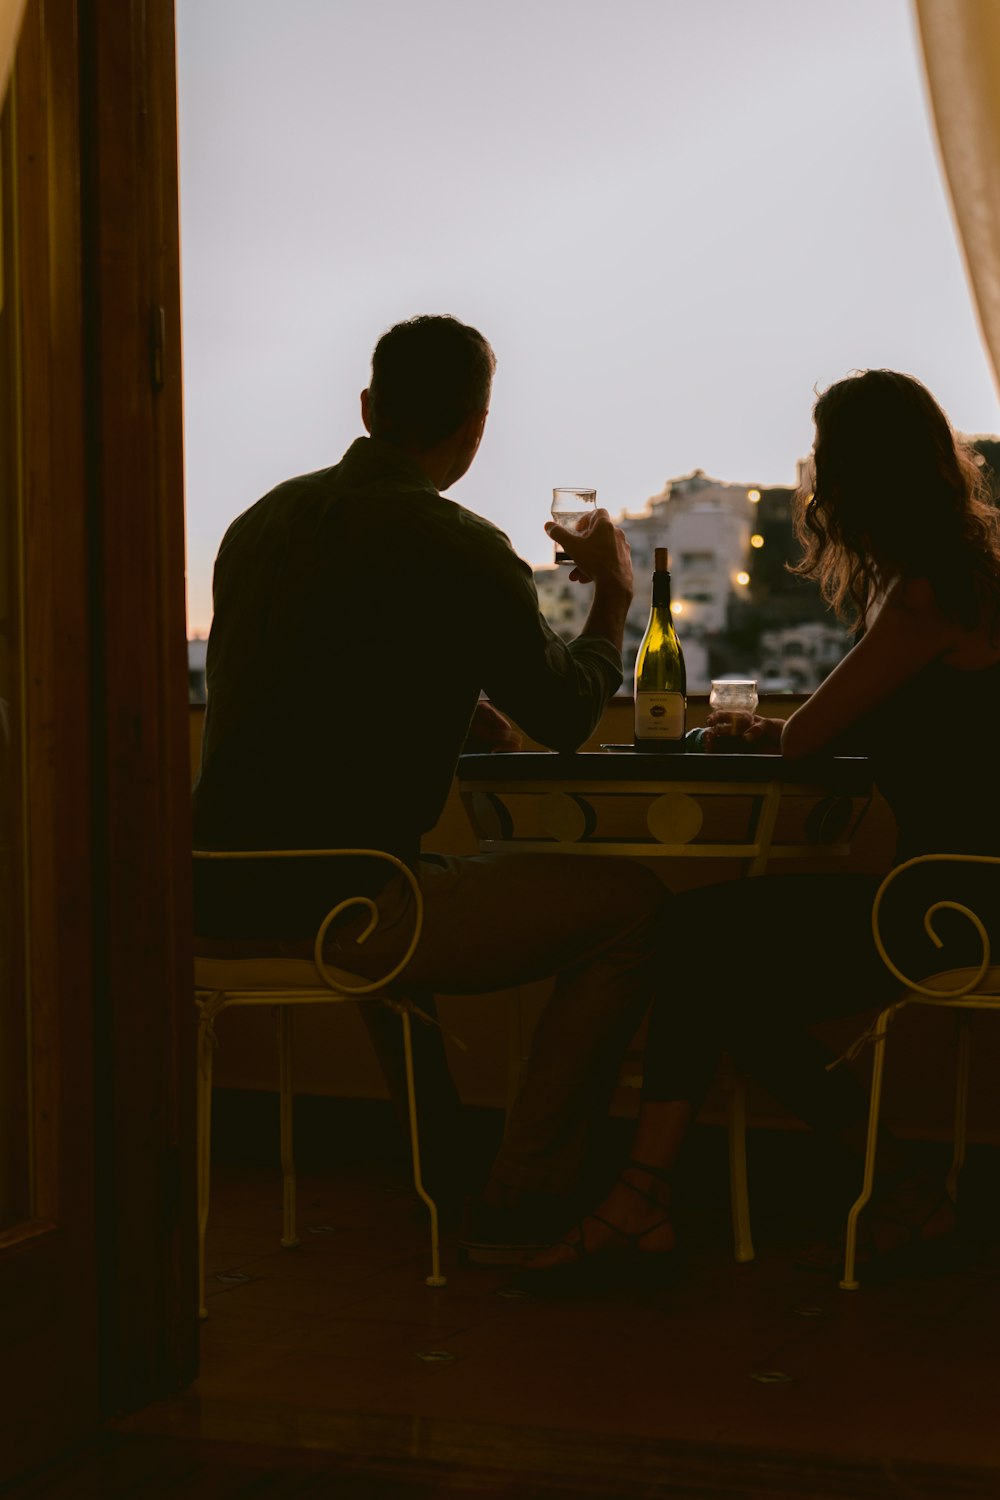 man and woman sitting on chair in front of table during sunset